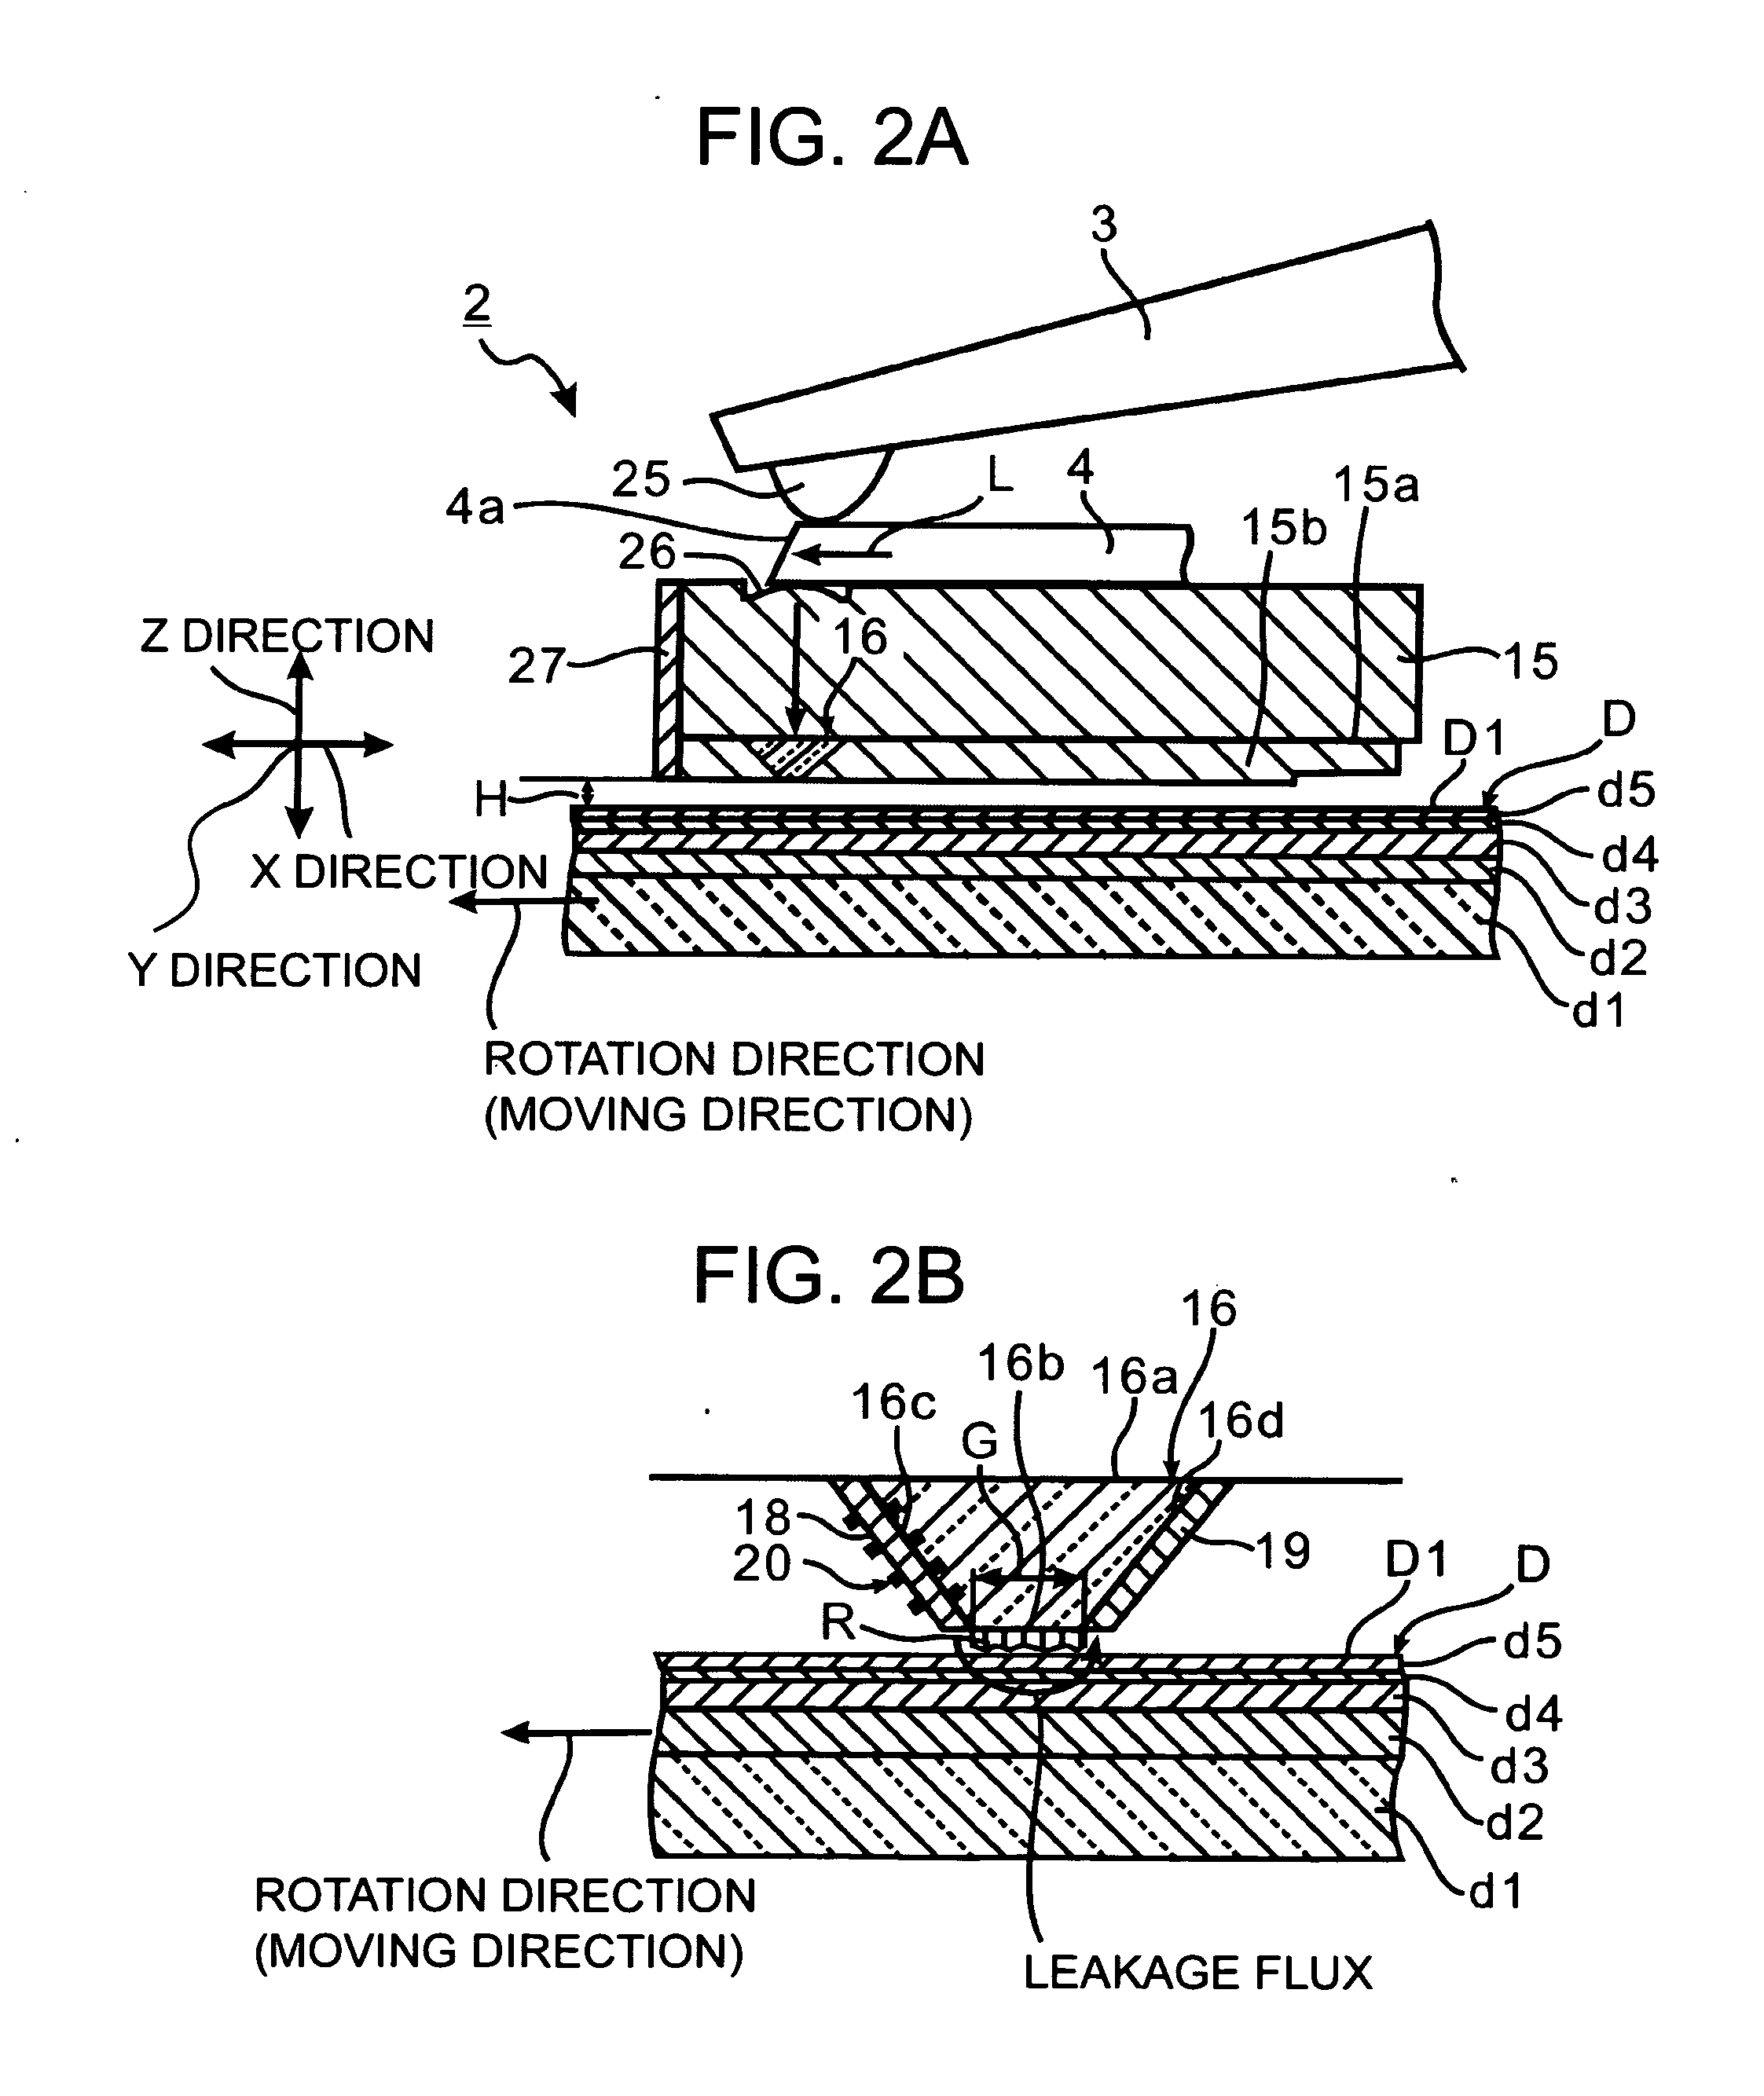 Near-field optical head and information recording/reproducing device